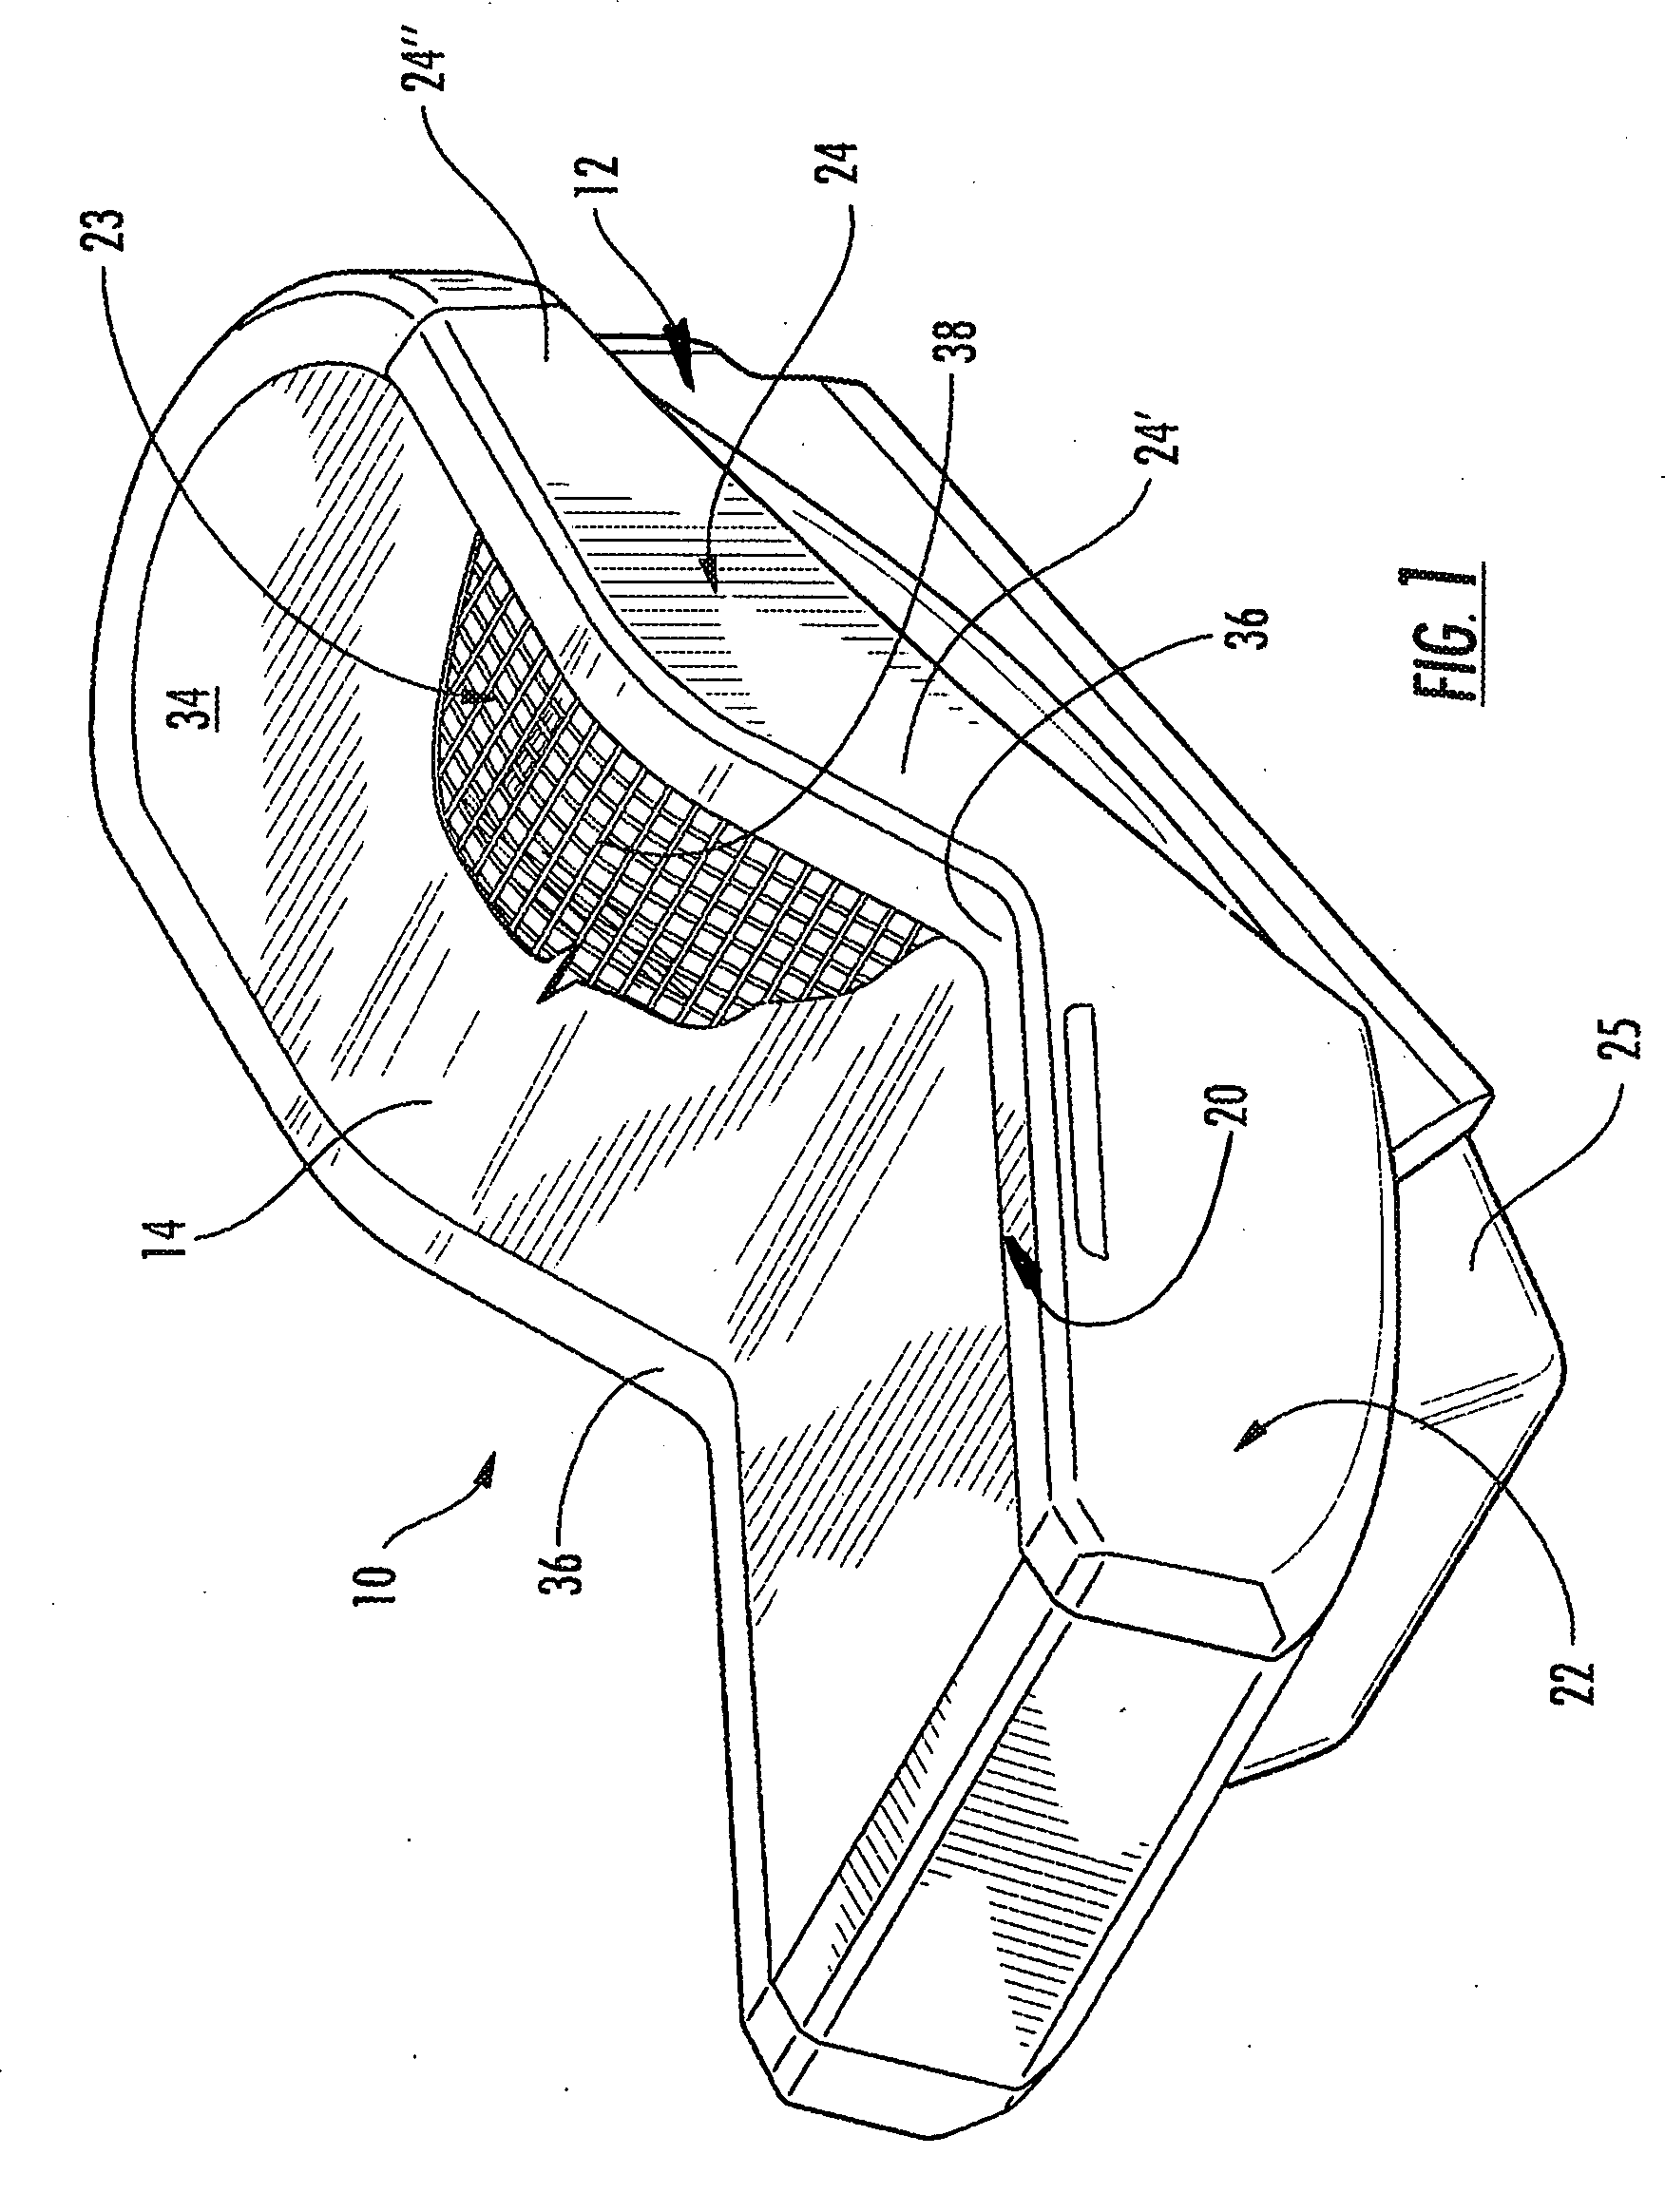 Apparatus for dry hydro-therapy body massage of a user in a seated position